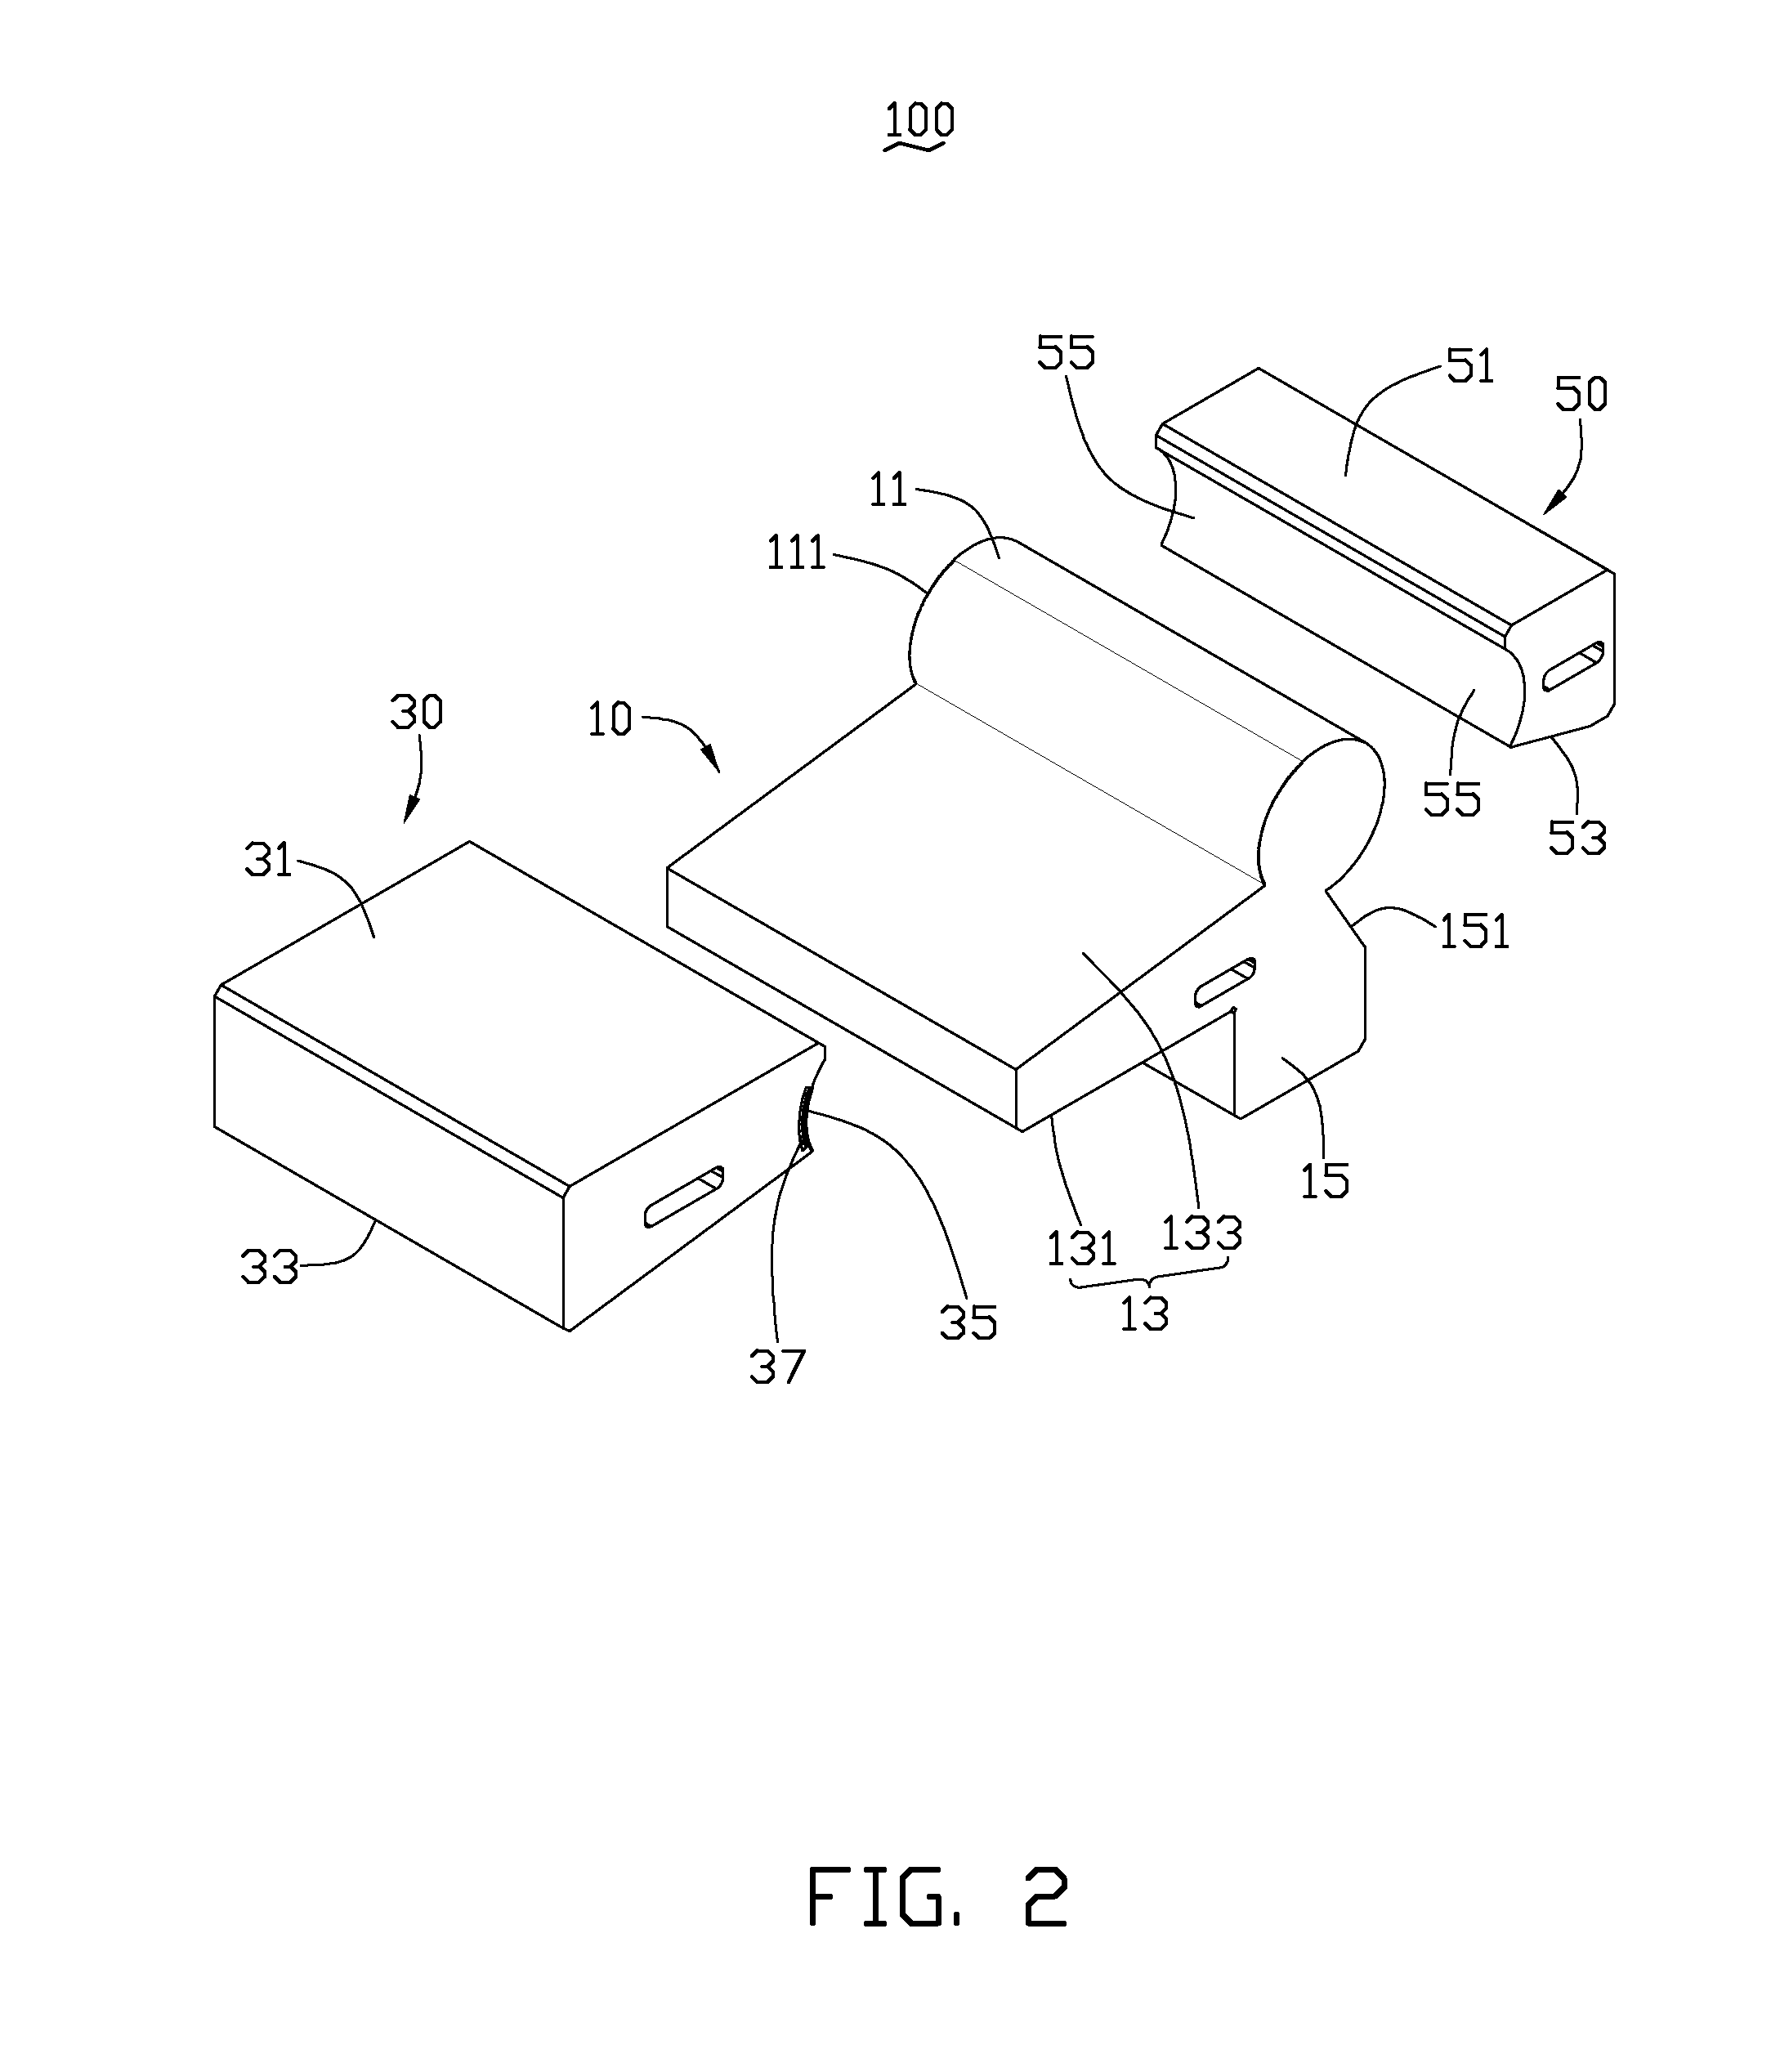 Positioning fixture assembly